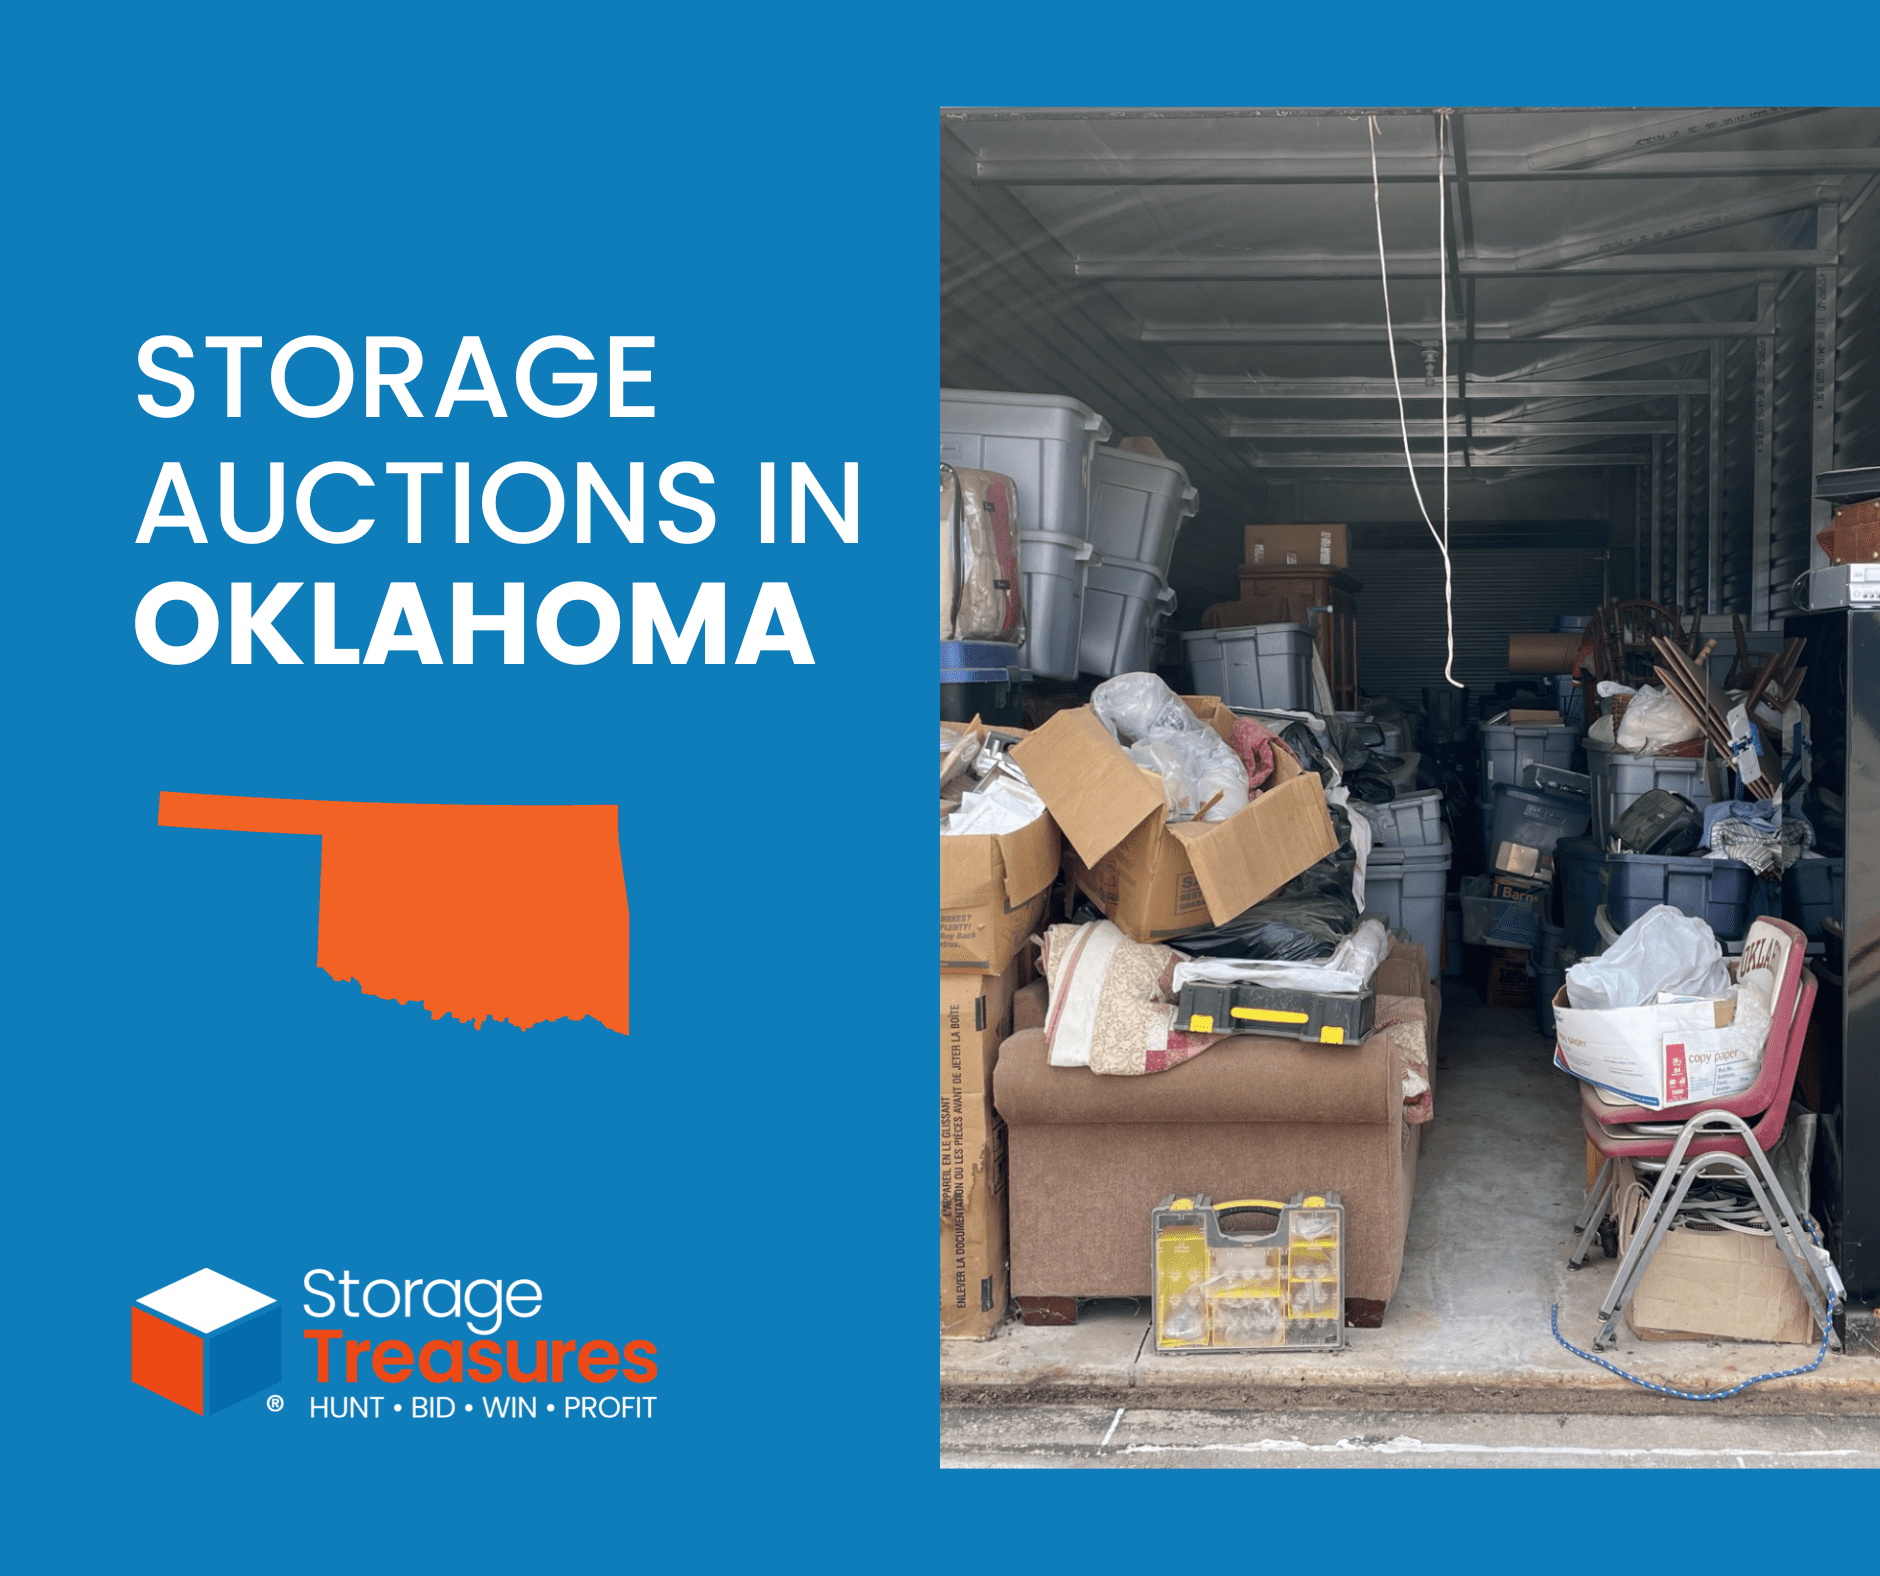 Storage auctions in Oklahoma